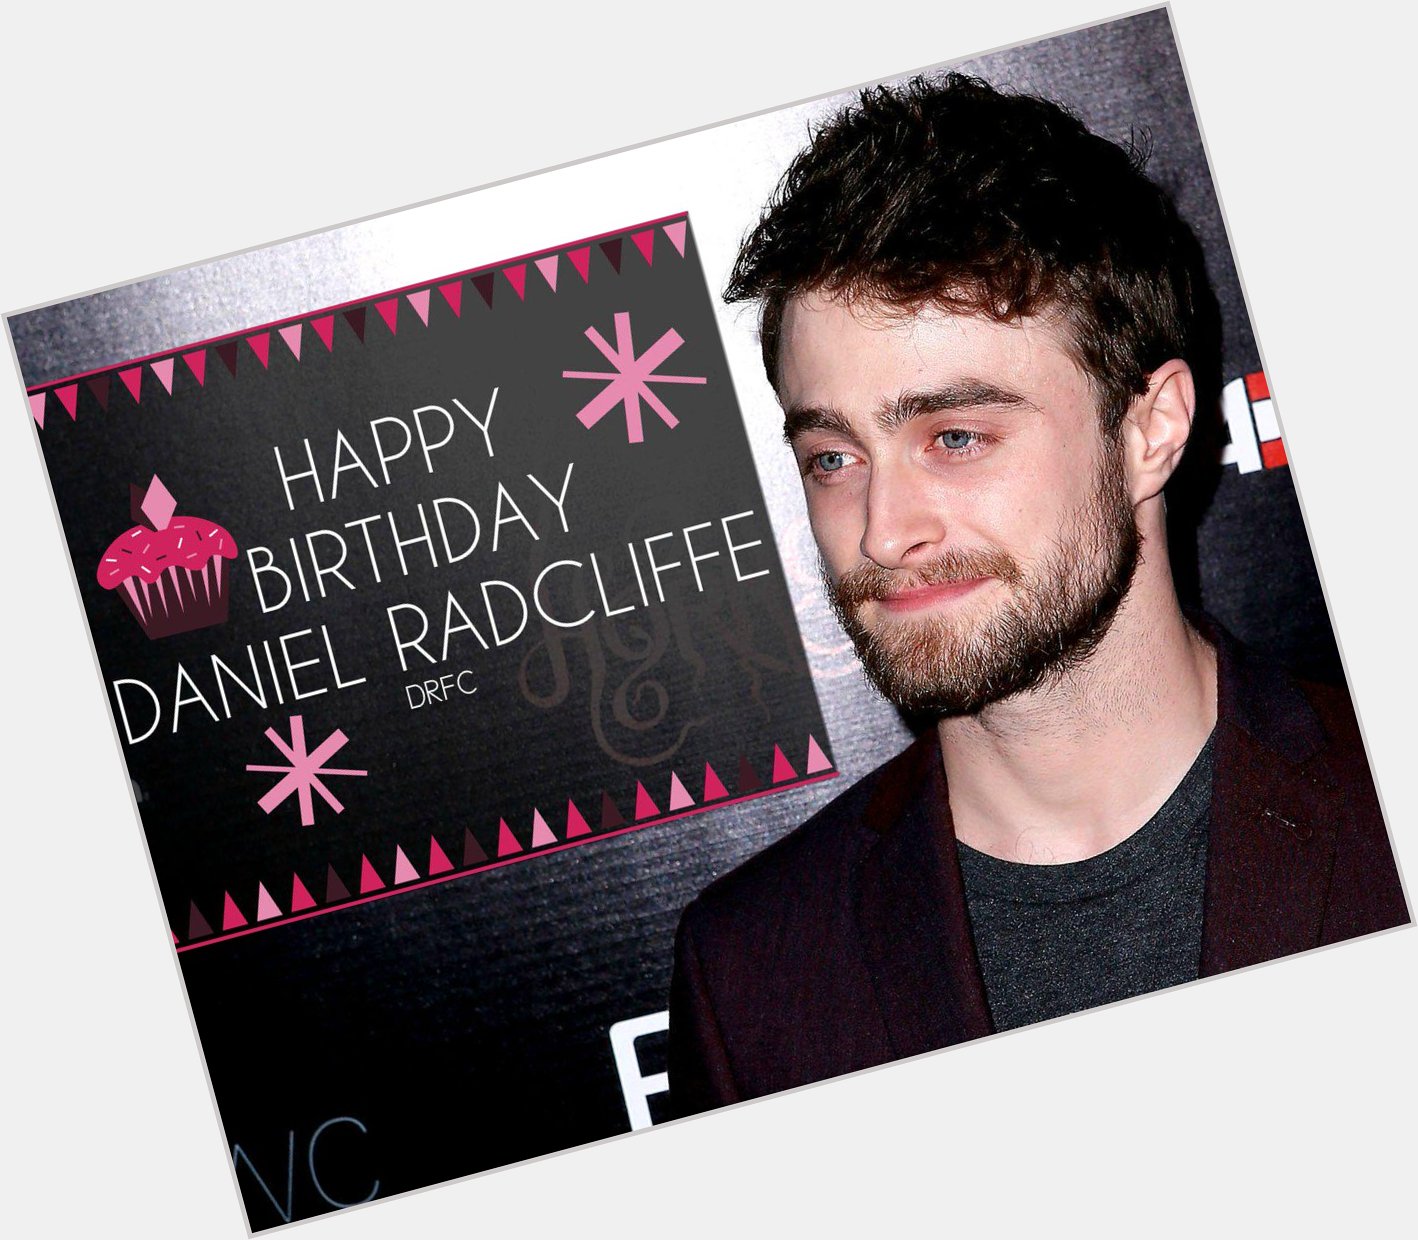 Happy Birthday Daniel Radcliffe
May You have many more with Everything you need in Life 